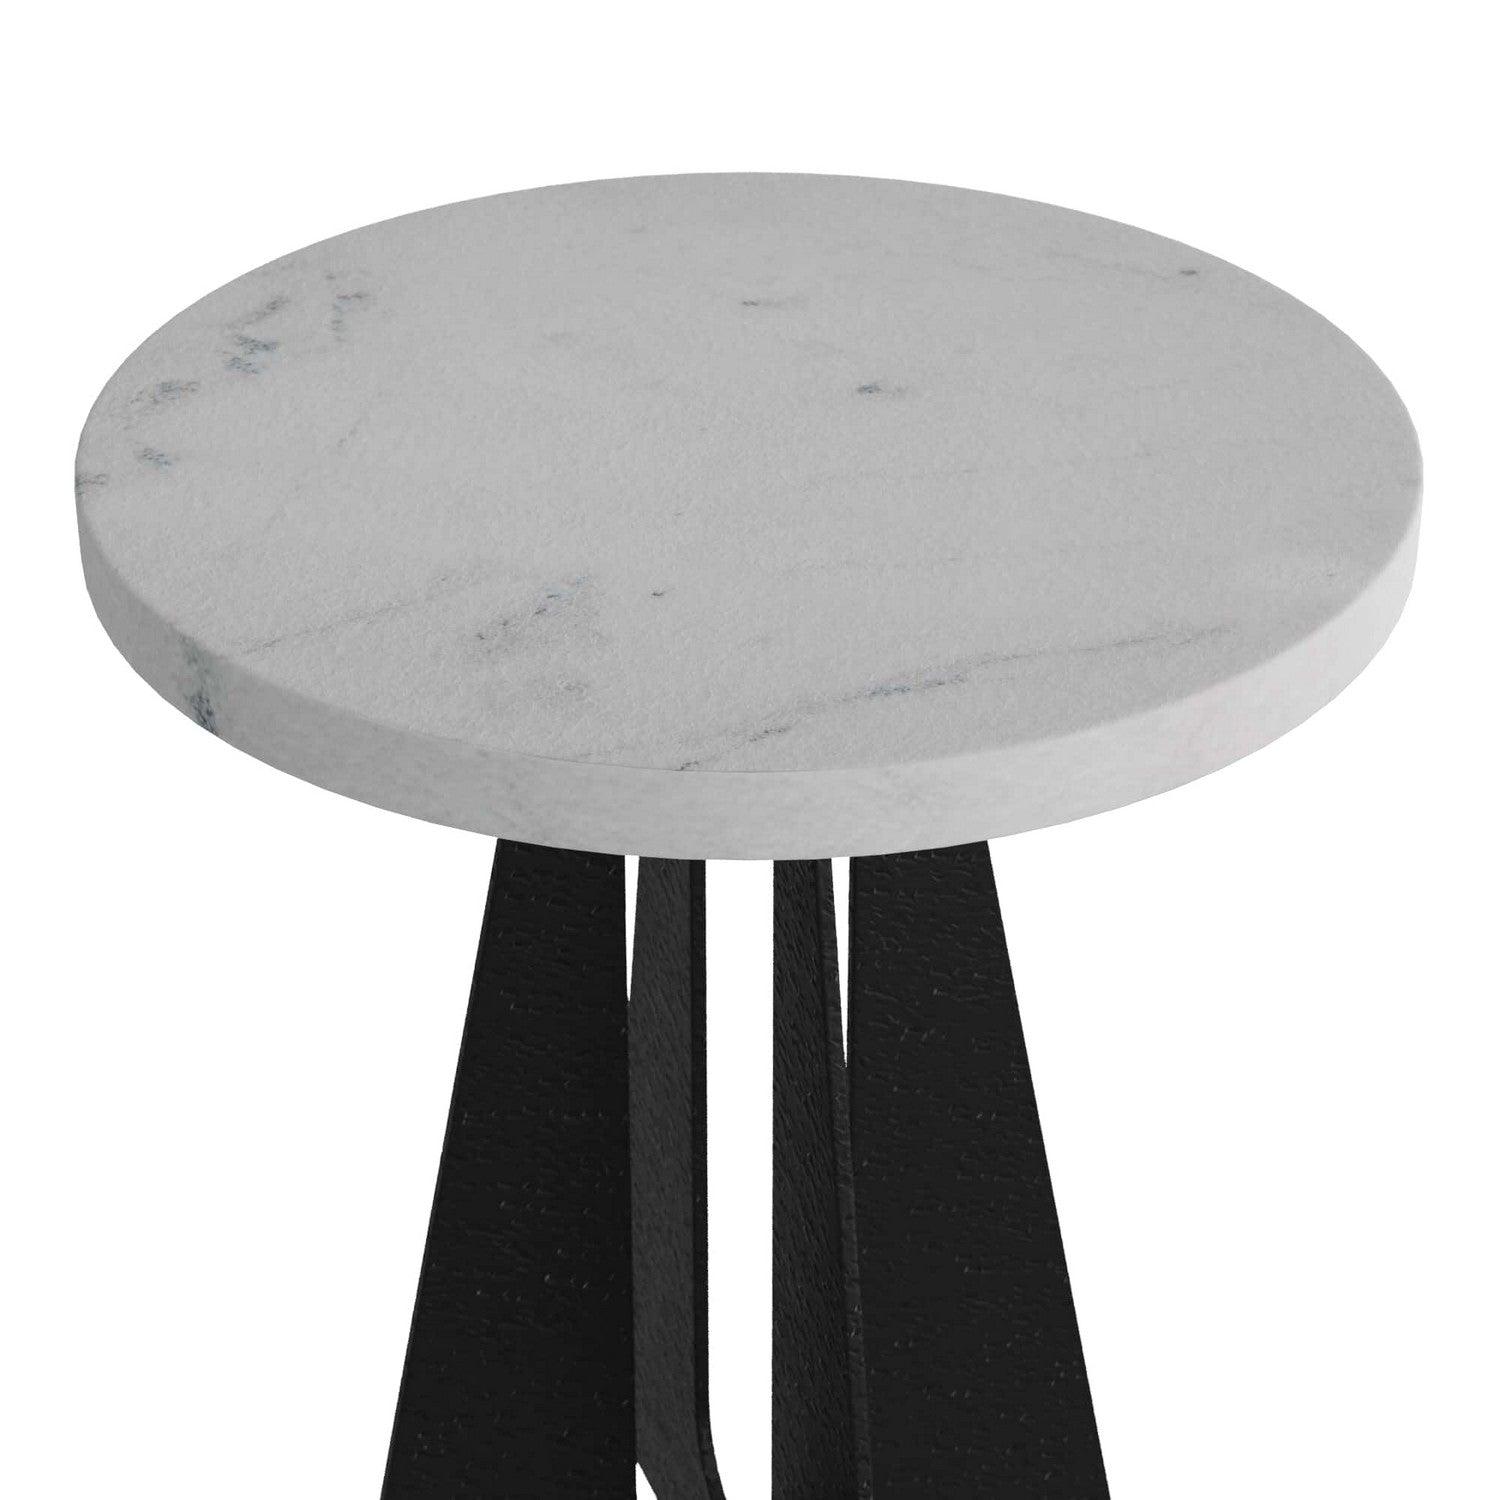 End Table from the Tobin collection in White finish